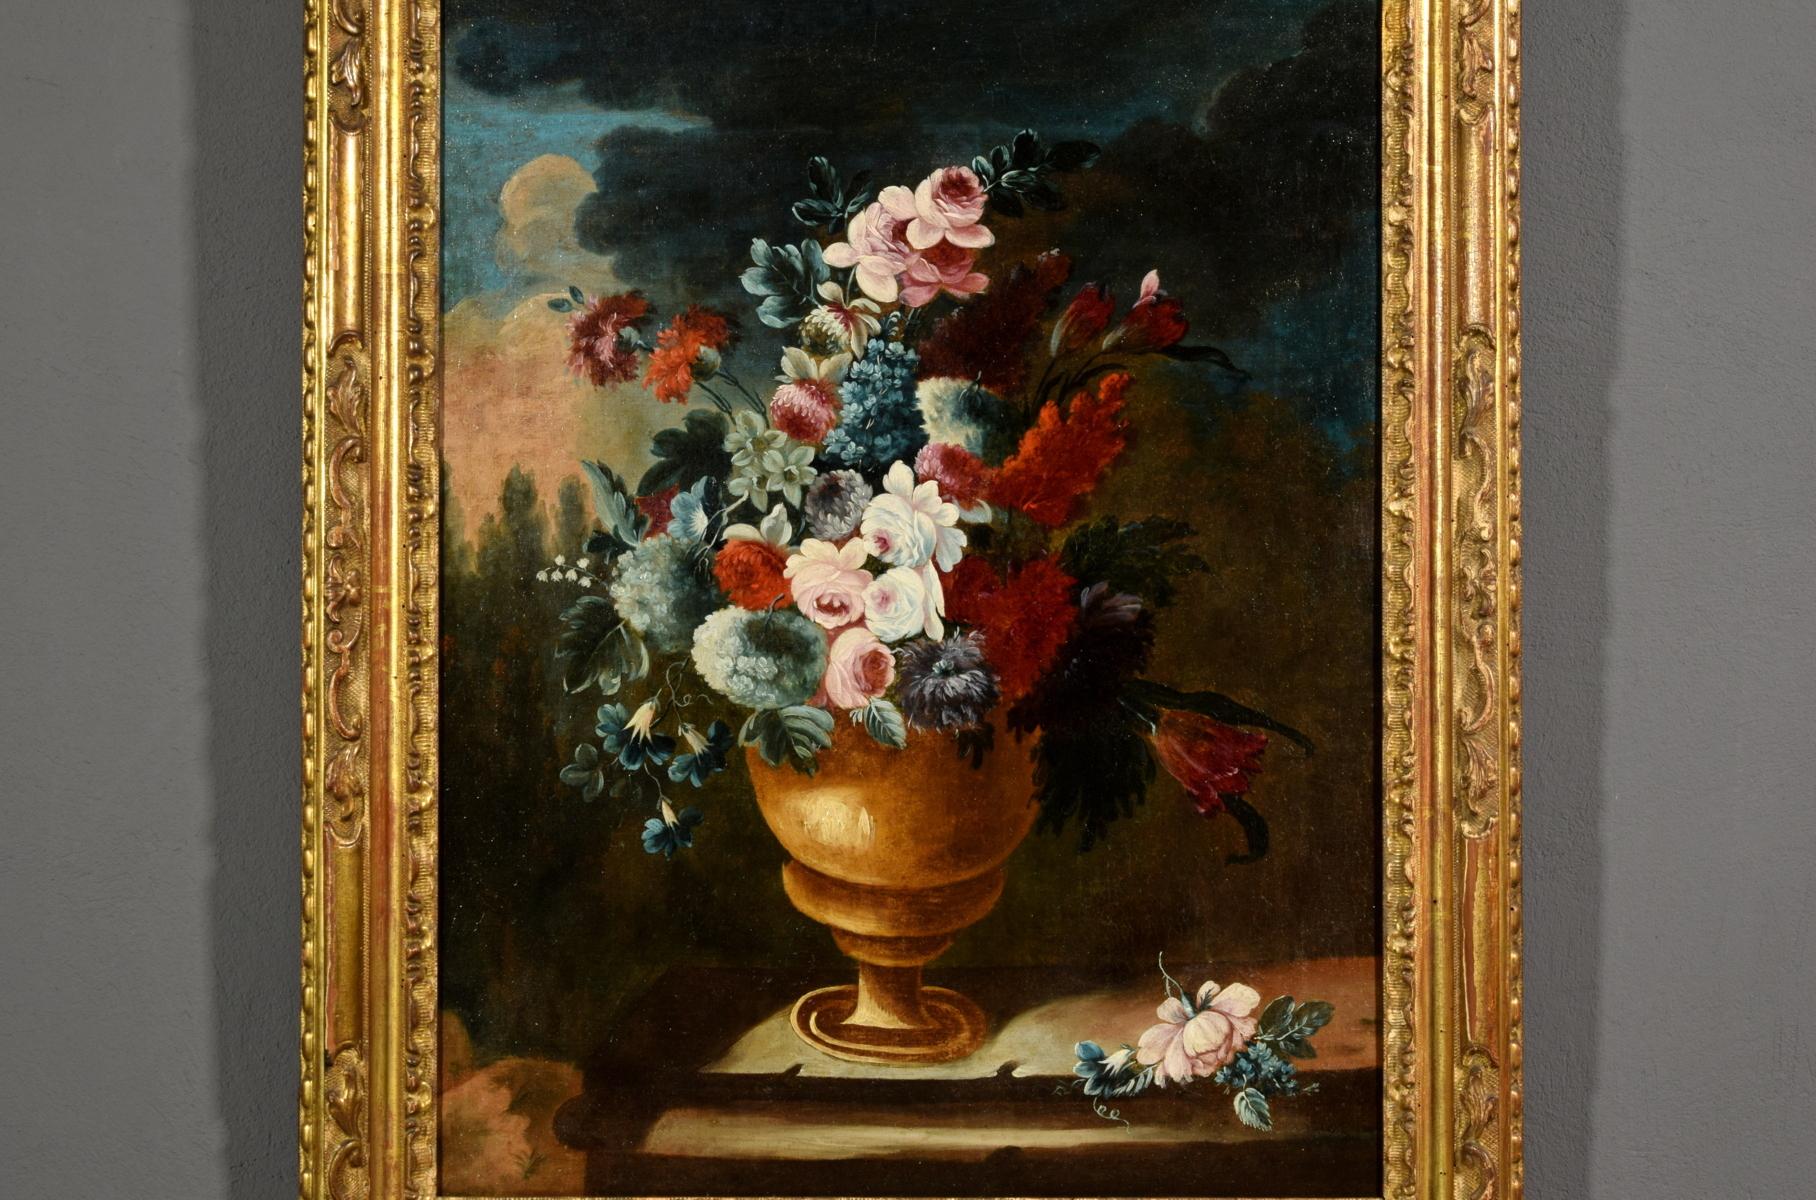 Baroque Giuseppe Lavagna, Italian Oil on Canvas Still Life with Vase and Flower